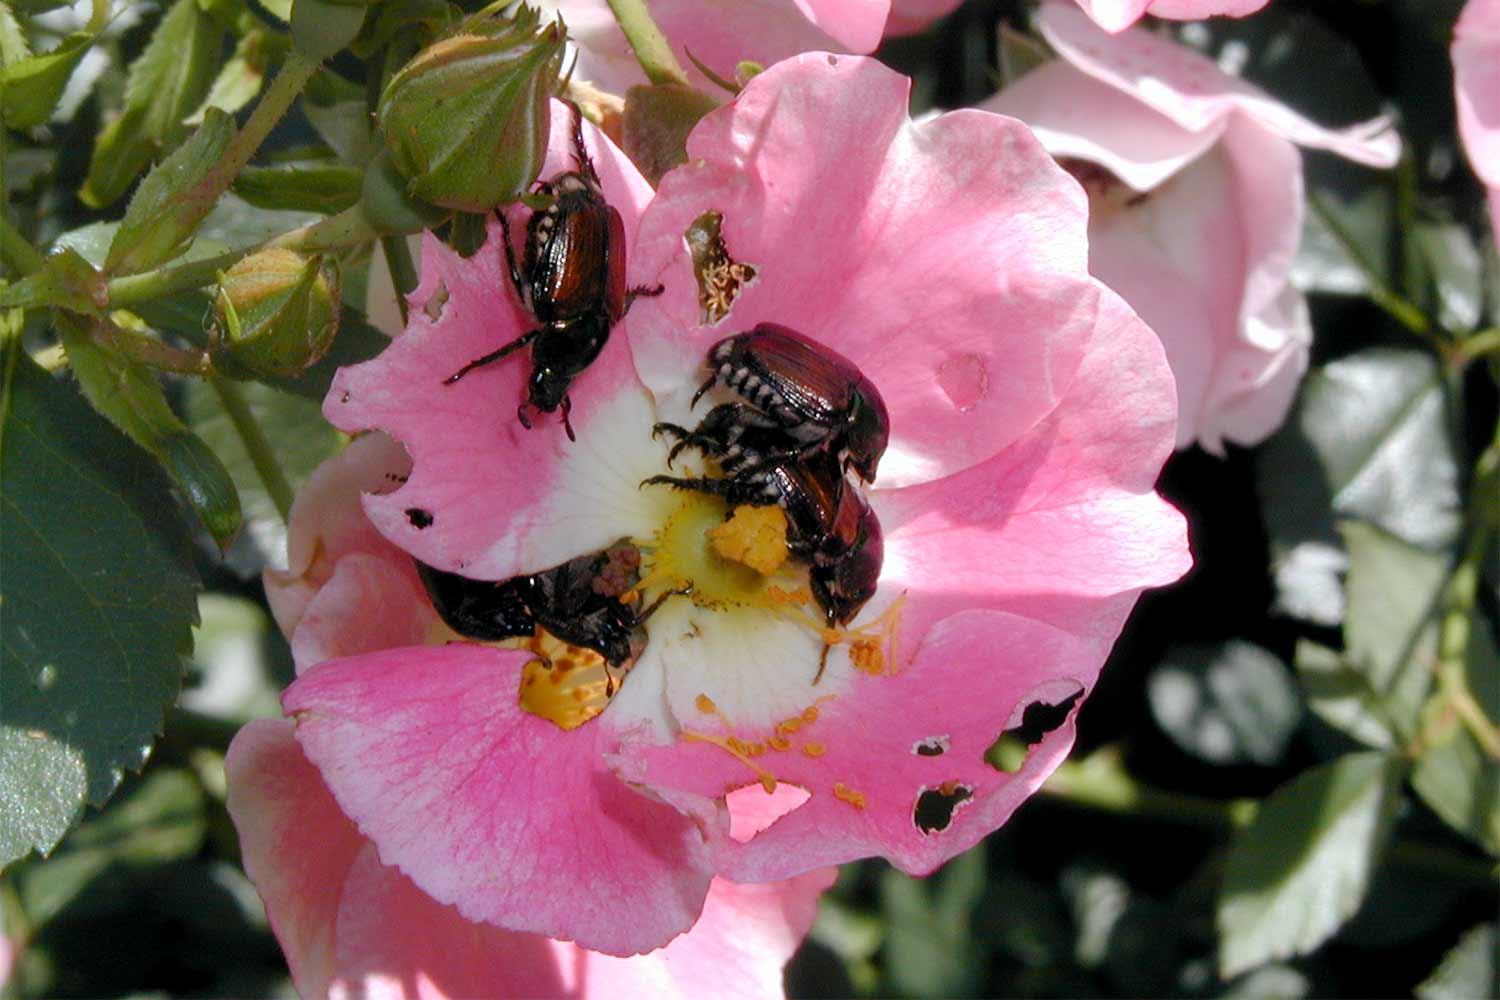 Four japanese beetles eating the pink petals of a rose.